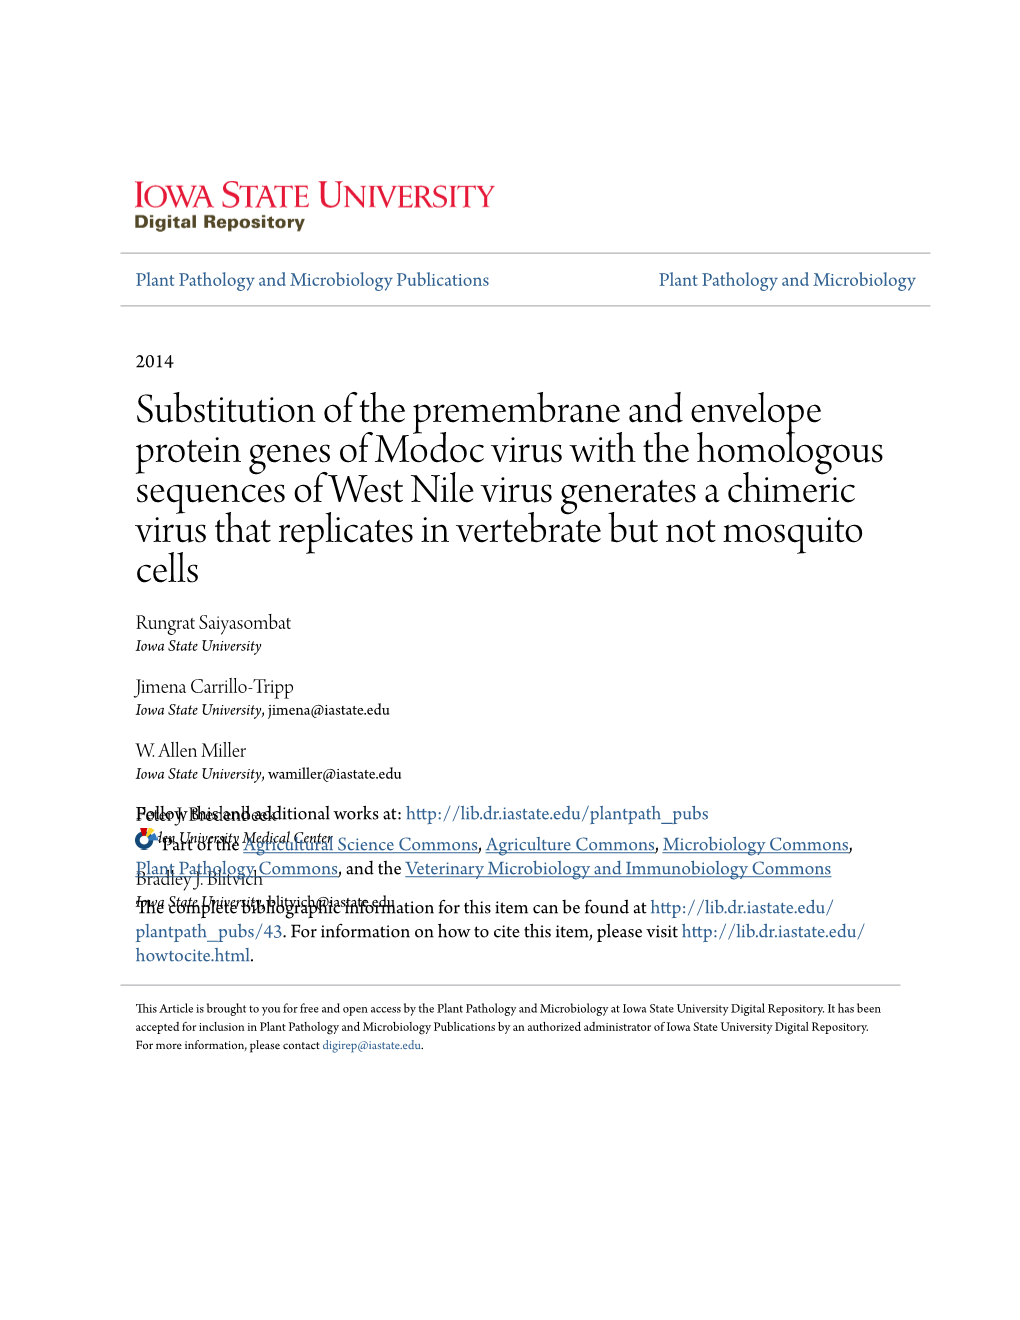 Substitution of the Premembrane and Envelope Protein Genes of Modoc